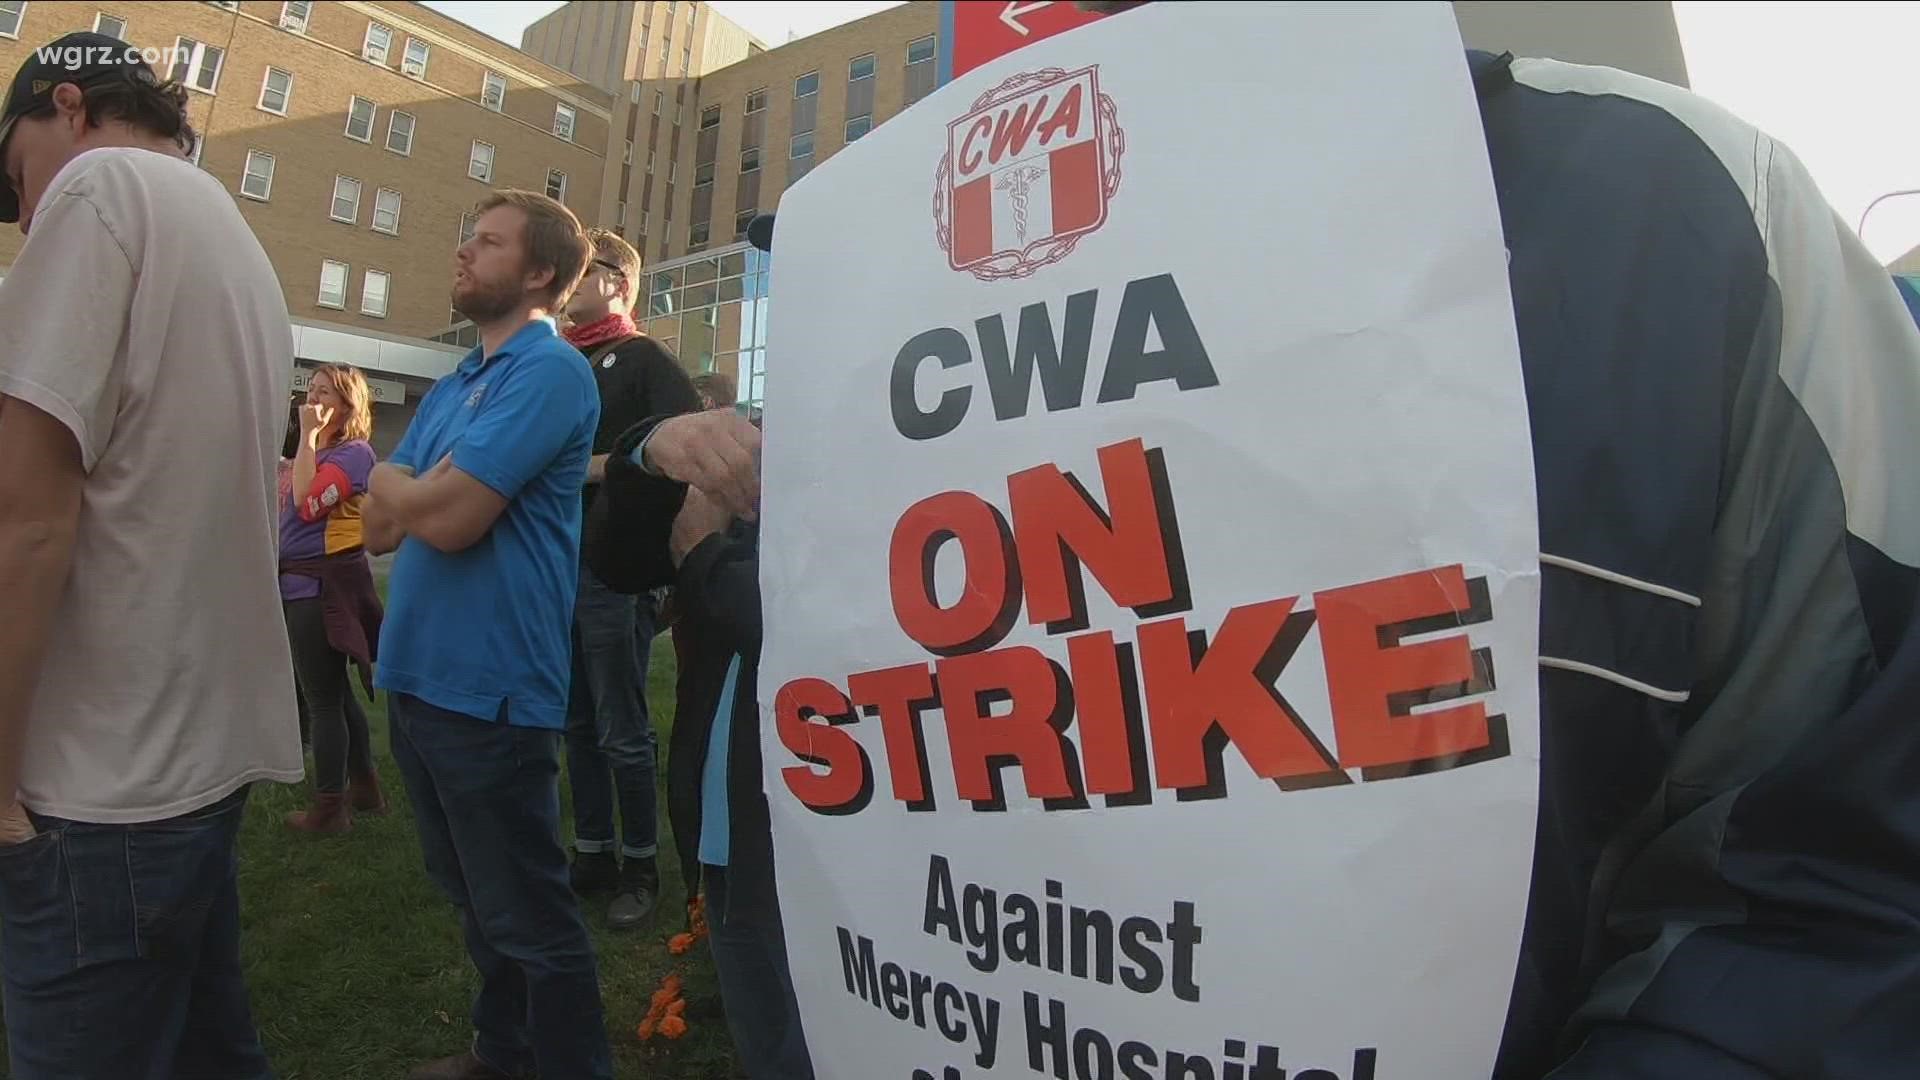 After failing to reach a deal between Catholic Health and the CWA, a strike at Mercy Hospital is about to enter its second day.